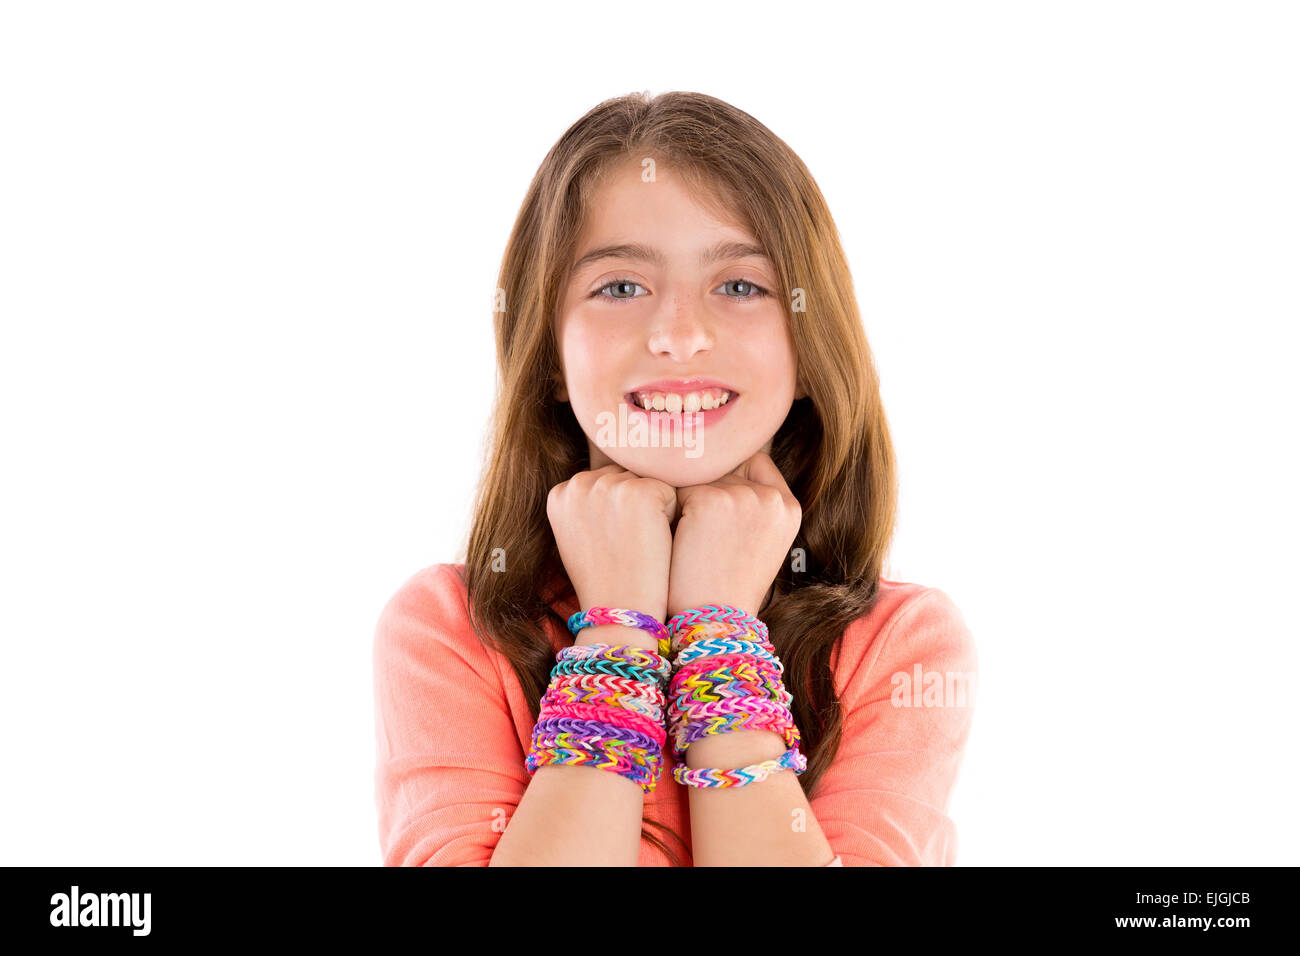 Loom rubber bands bracelets blond kid girl smiling hands in neck on white background Stock Photo